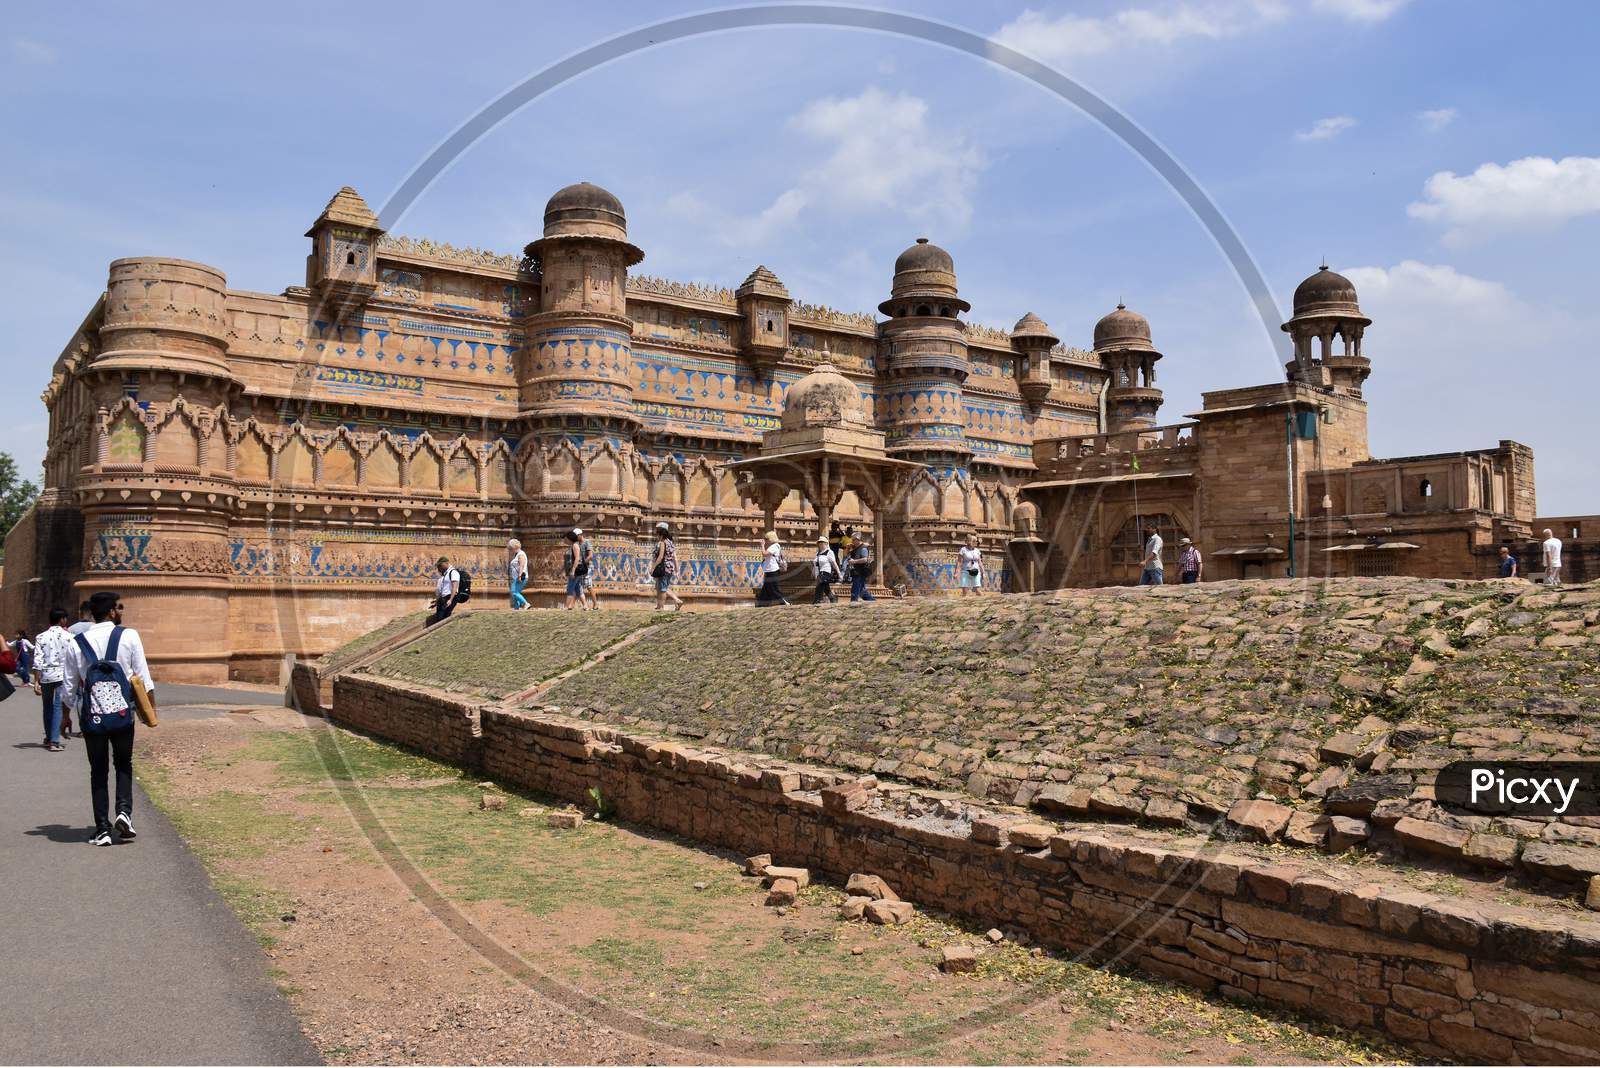 Gwalior, Madhya Pradesh/India : March 15, 2020 - 'Gwalior Fort' It Is Hill Fort Near Gwalior And Described As 'The Pearl Amongst Fortresses In India' Built In 8Th Century